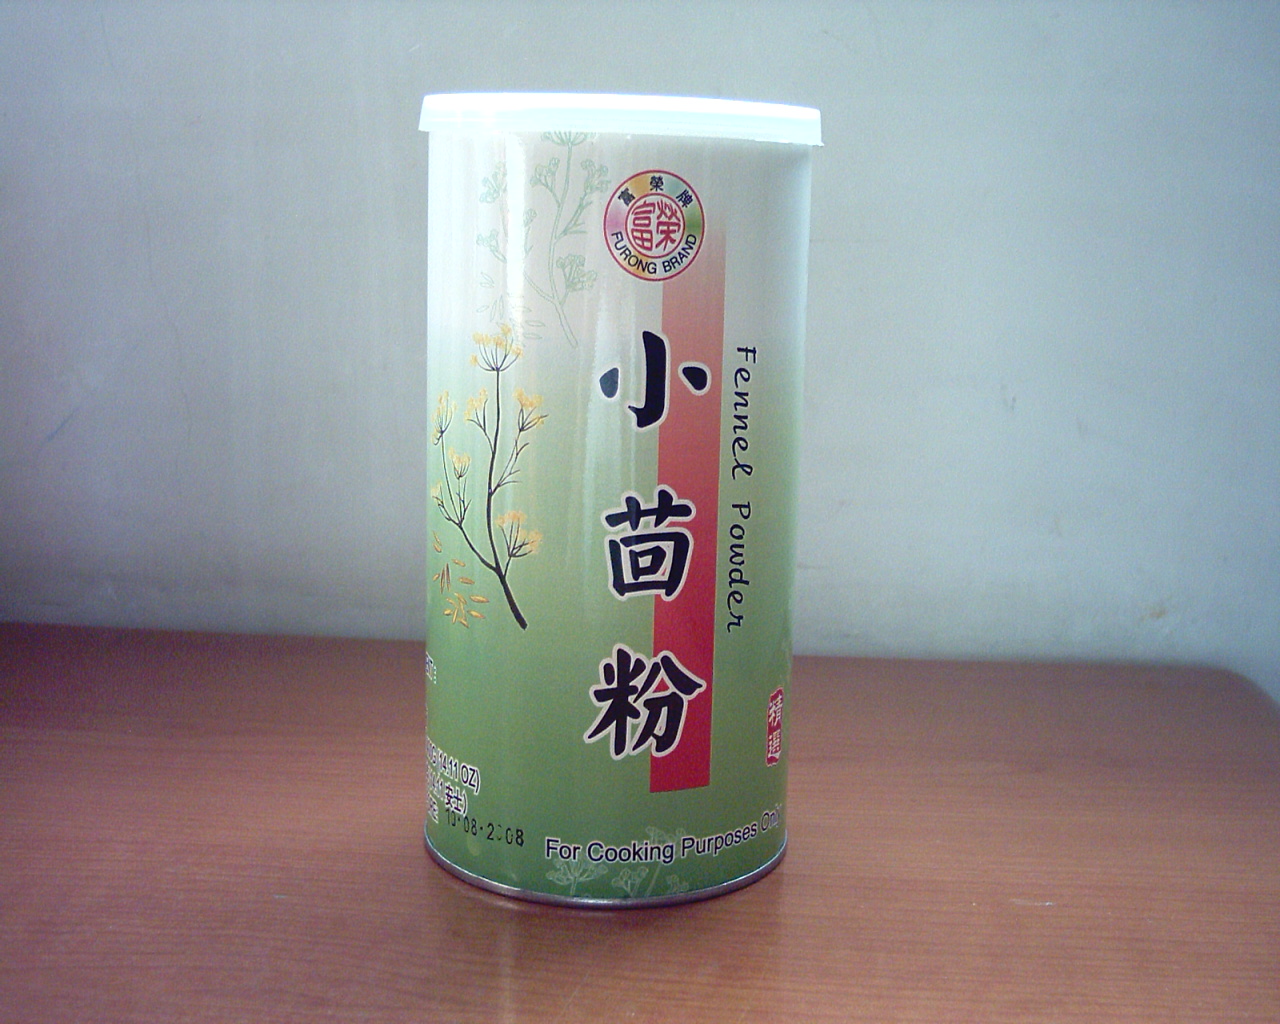 Canned fennel powder for cooking